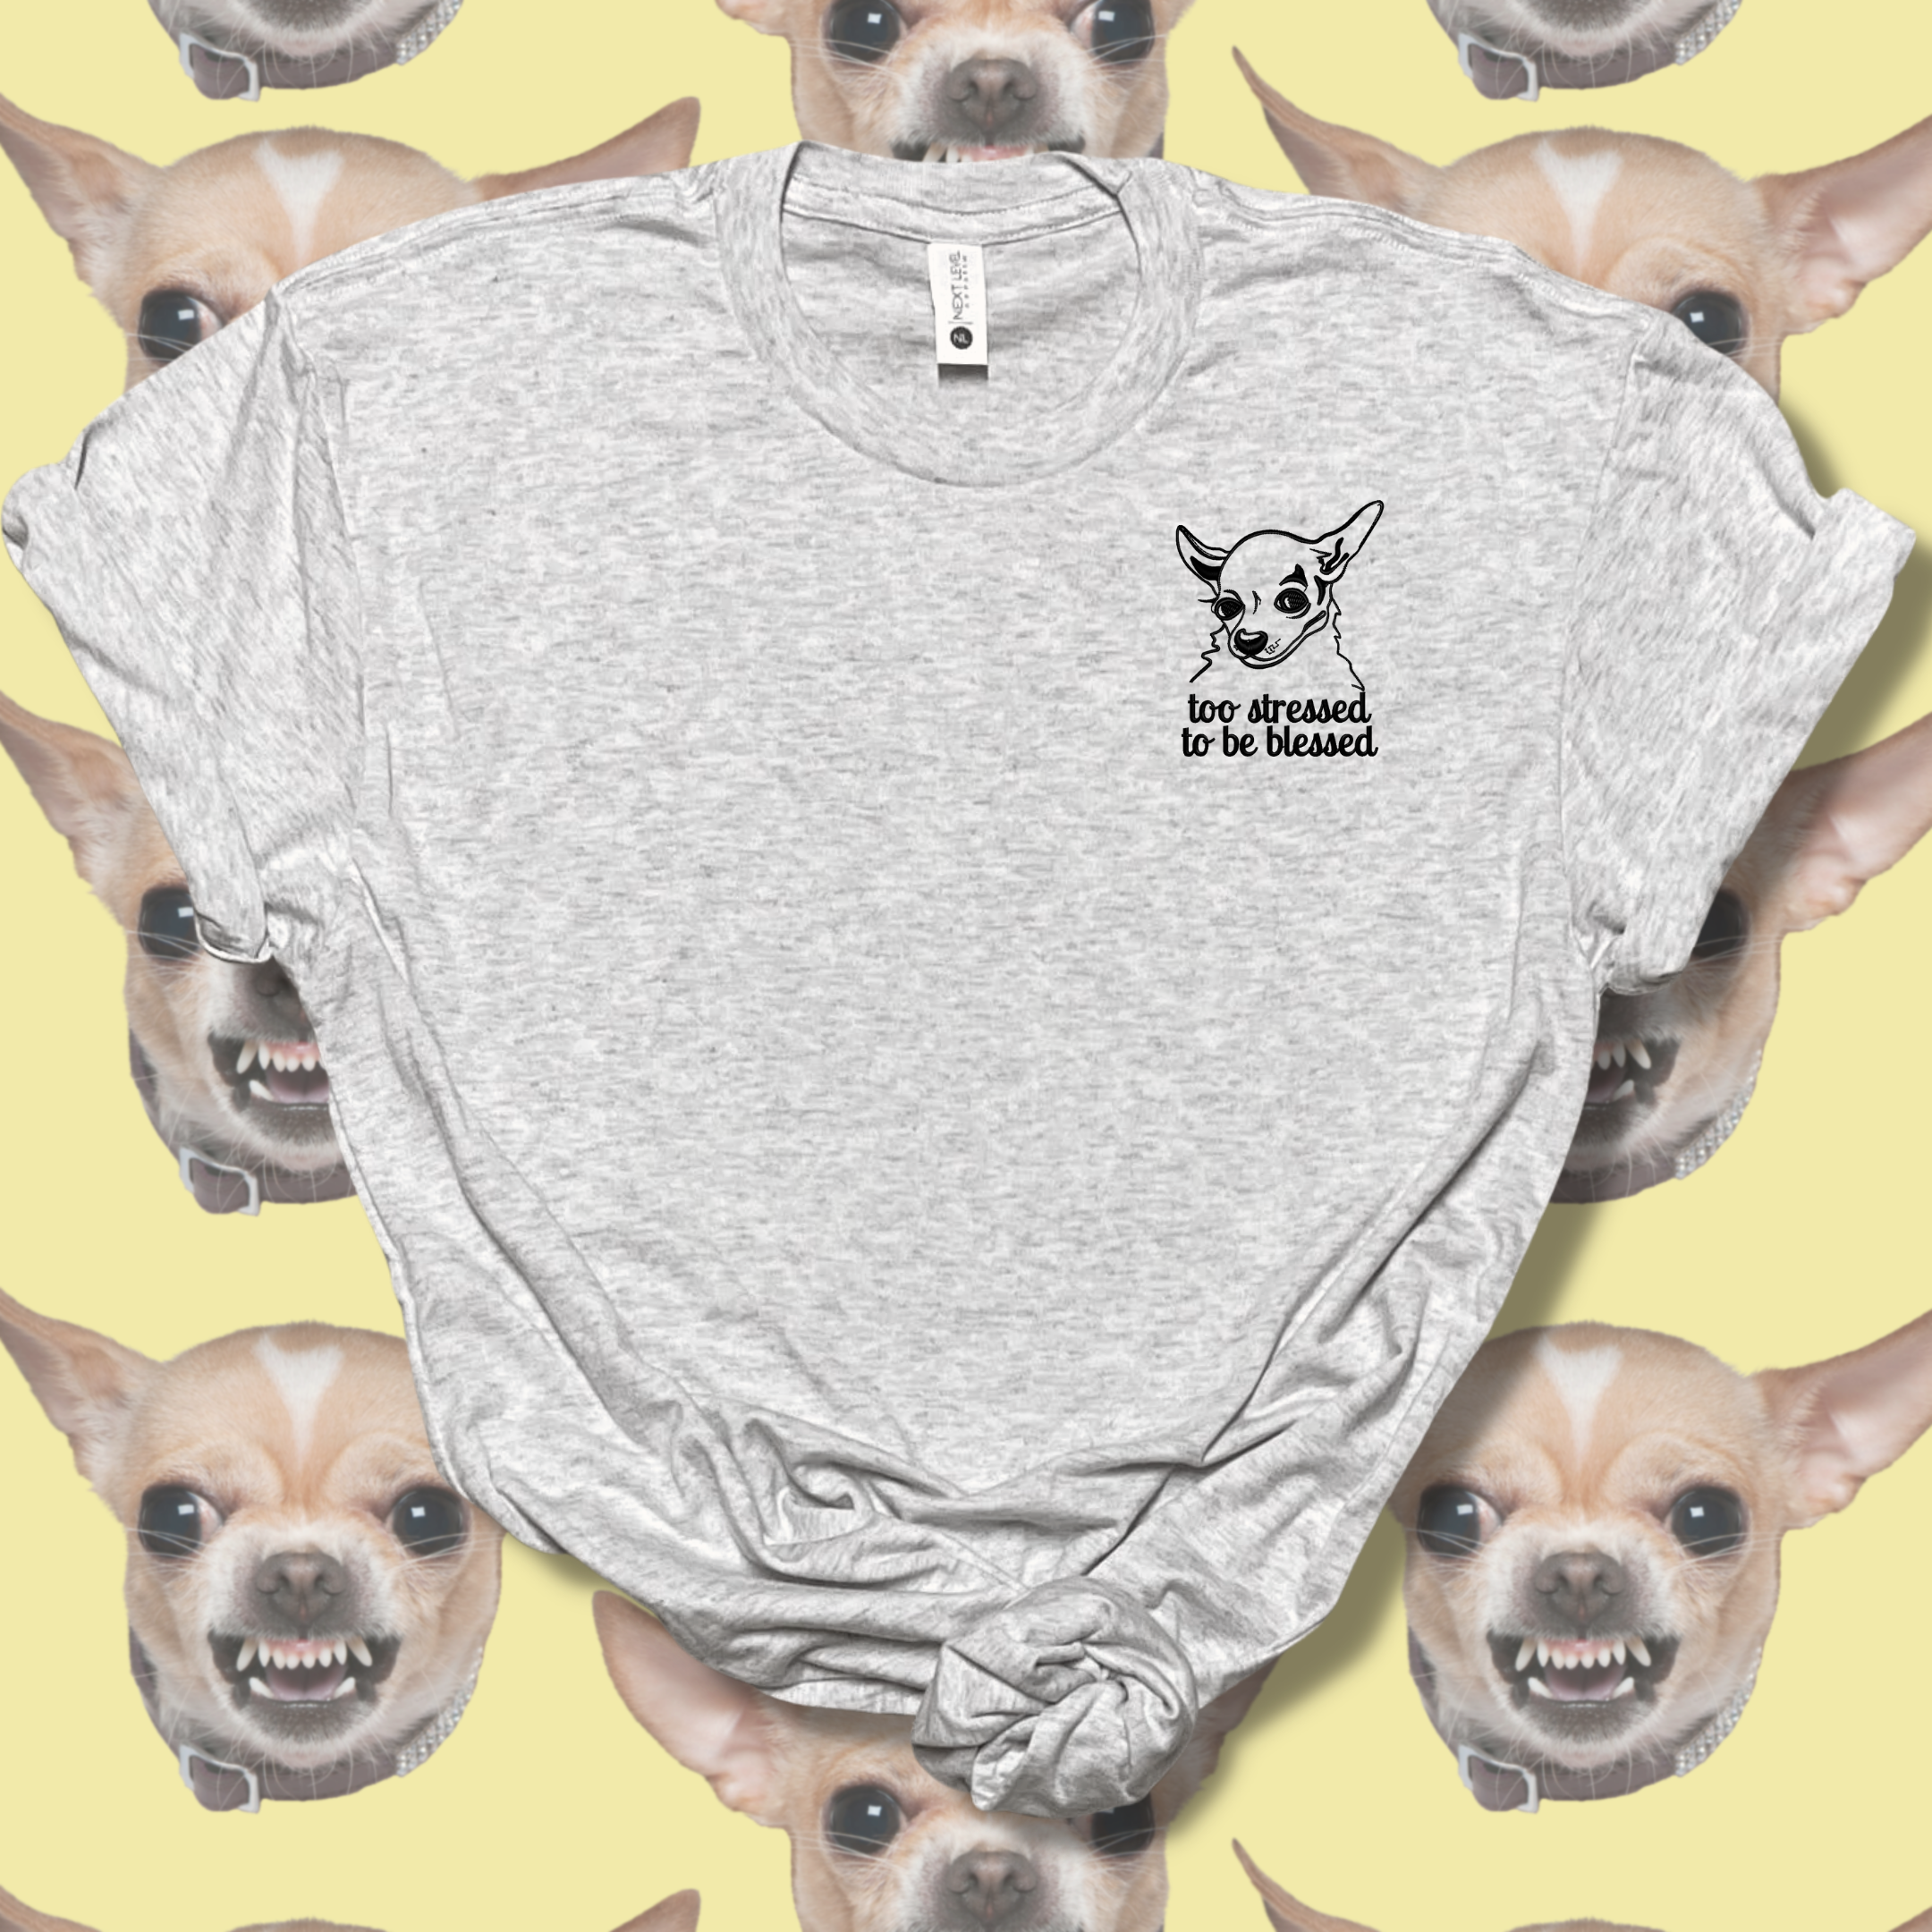 Too Stressed to be Blessed Anxious Chihuahua Embroidered Tee Shirt, Unisex